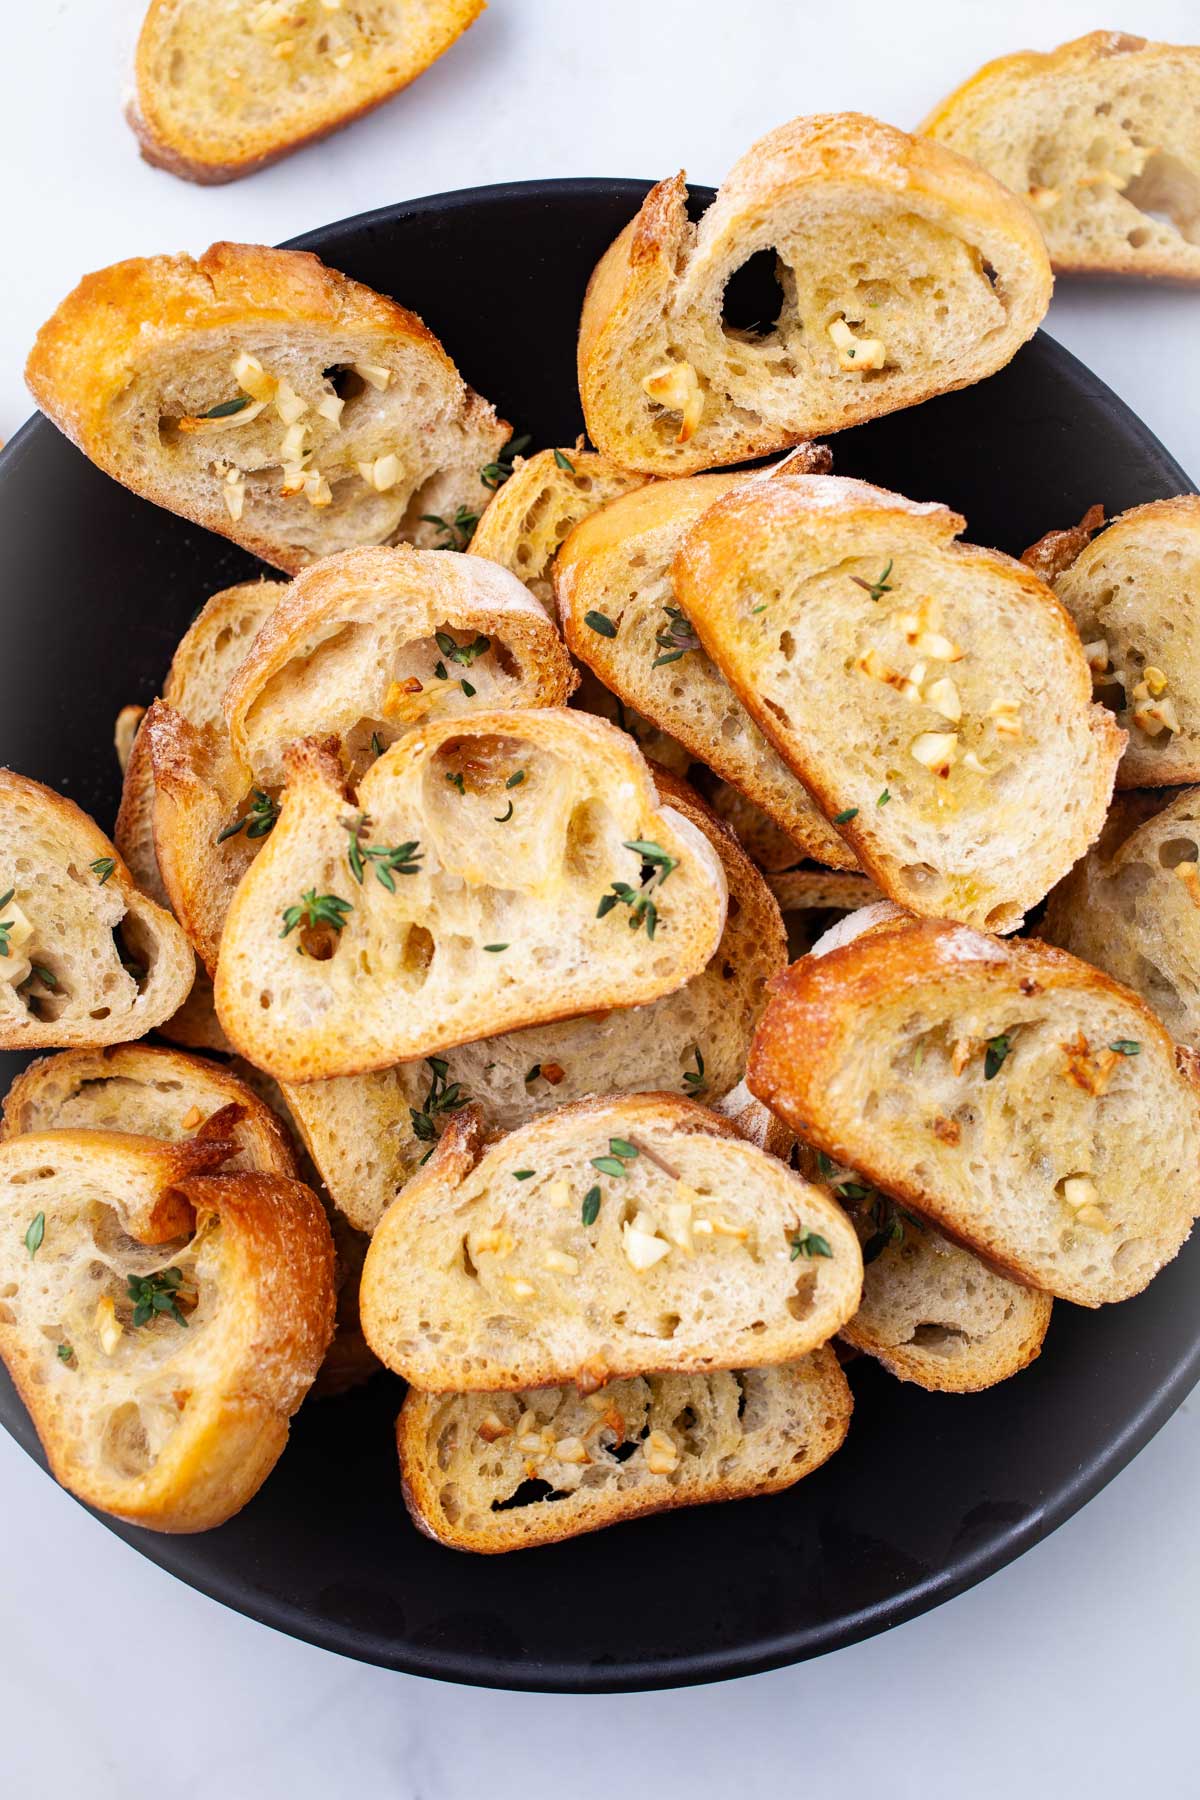 Oven-roasted garlic crostini toasts topped with garlic and fresh herbs.